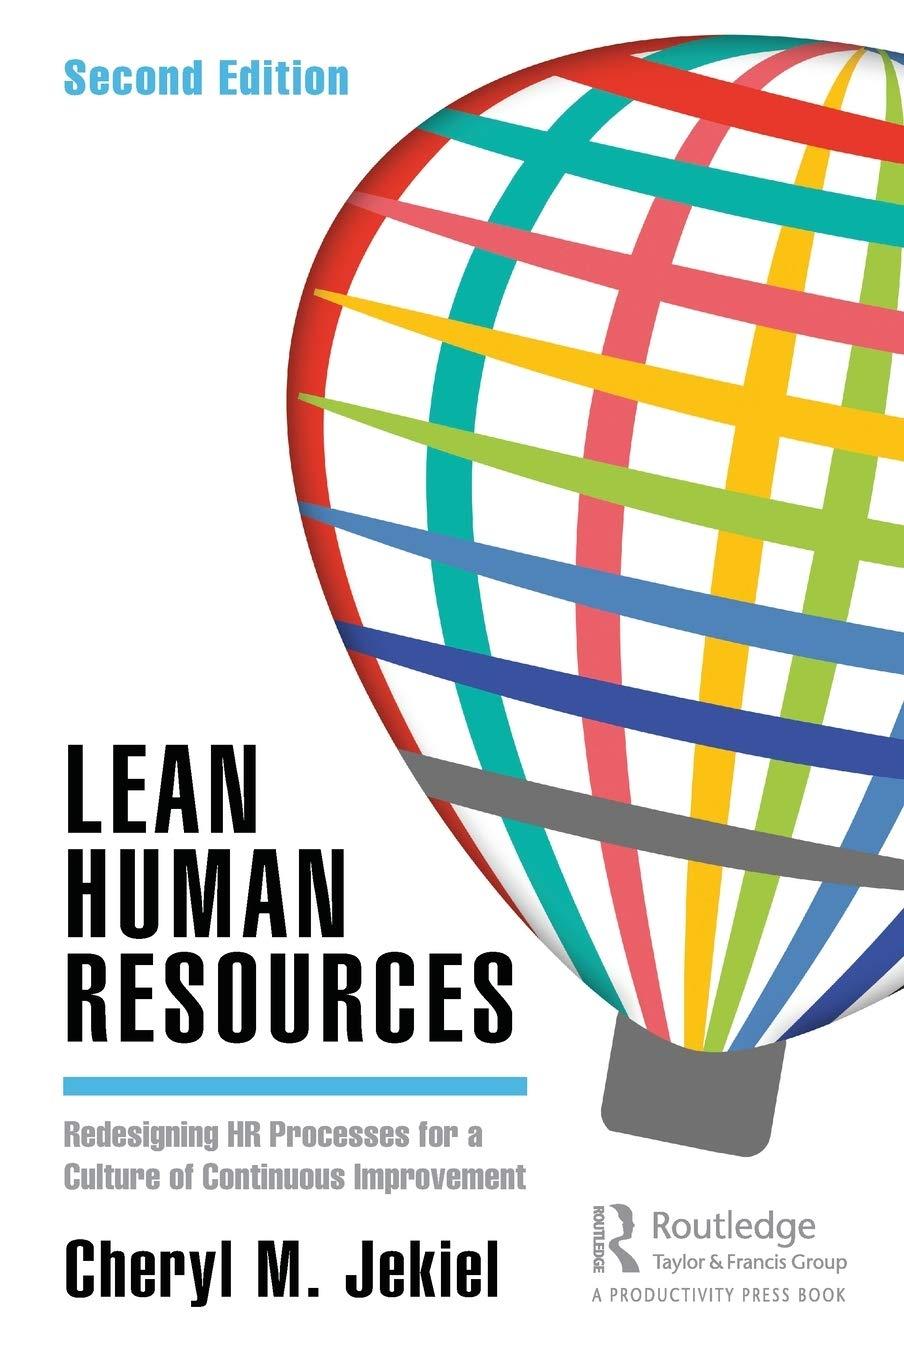 lean human resources redesigning hr processes for a culture of continuous improvement 2nd edition cheryl m.